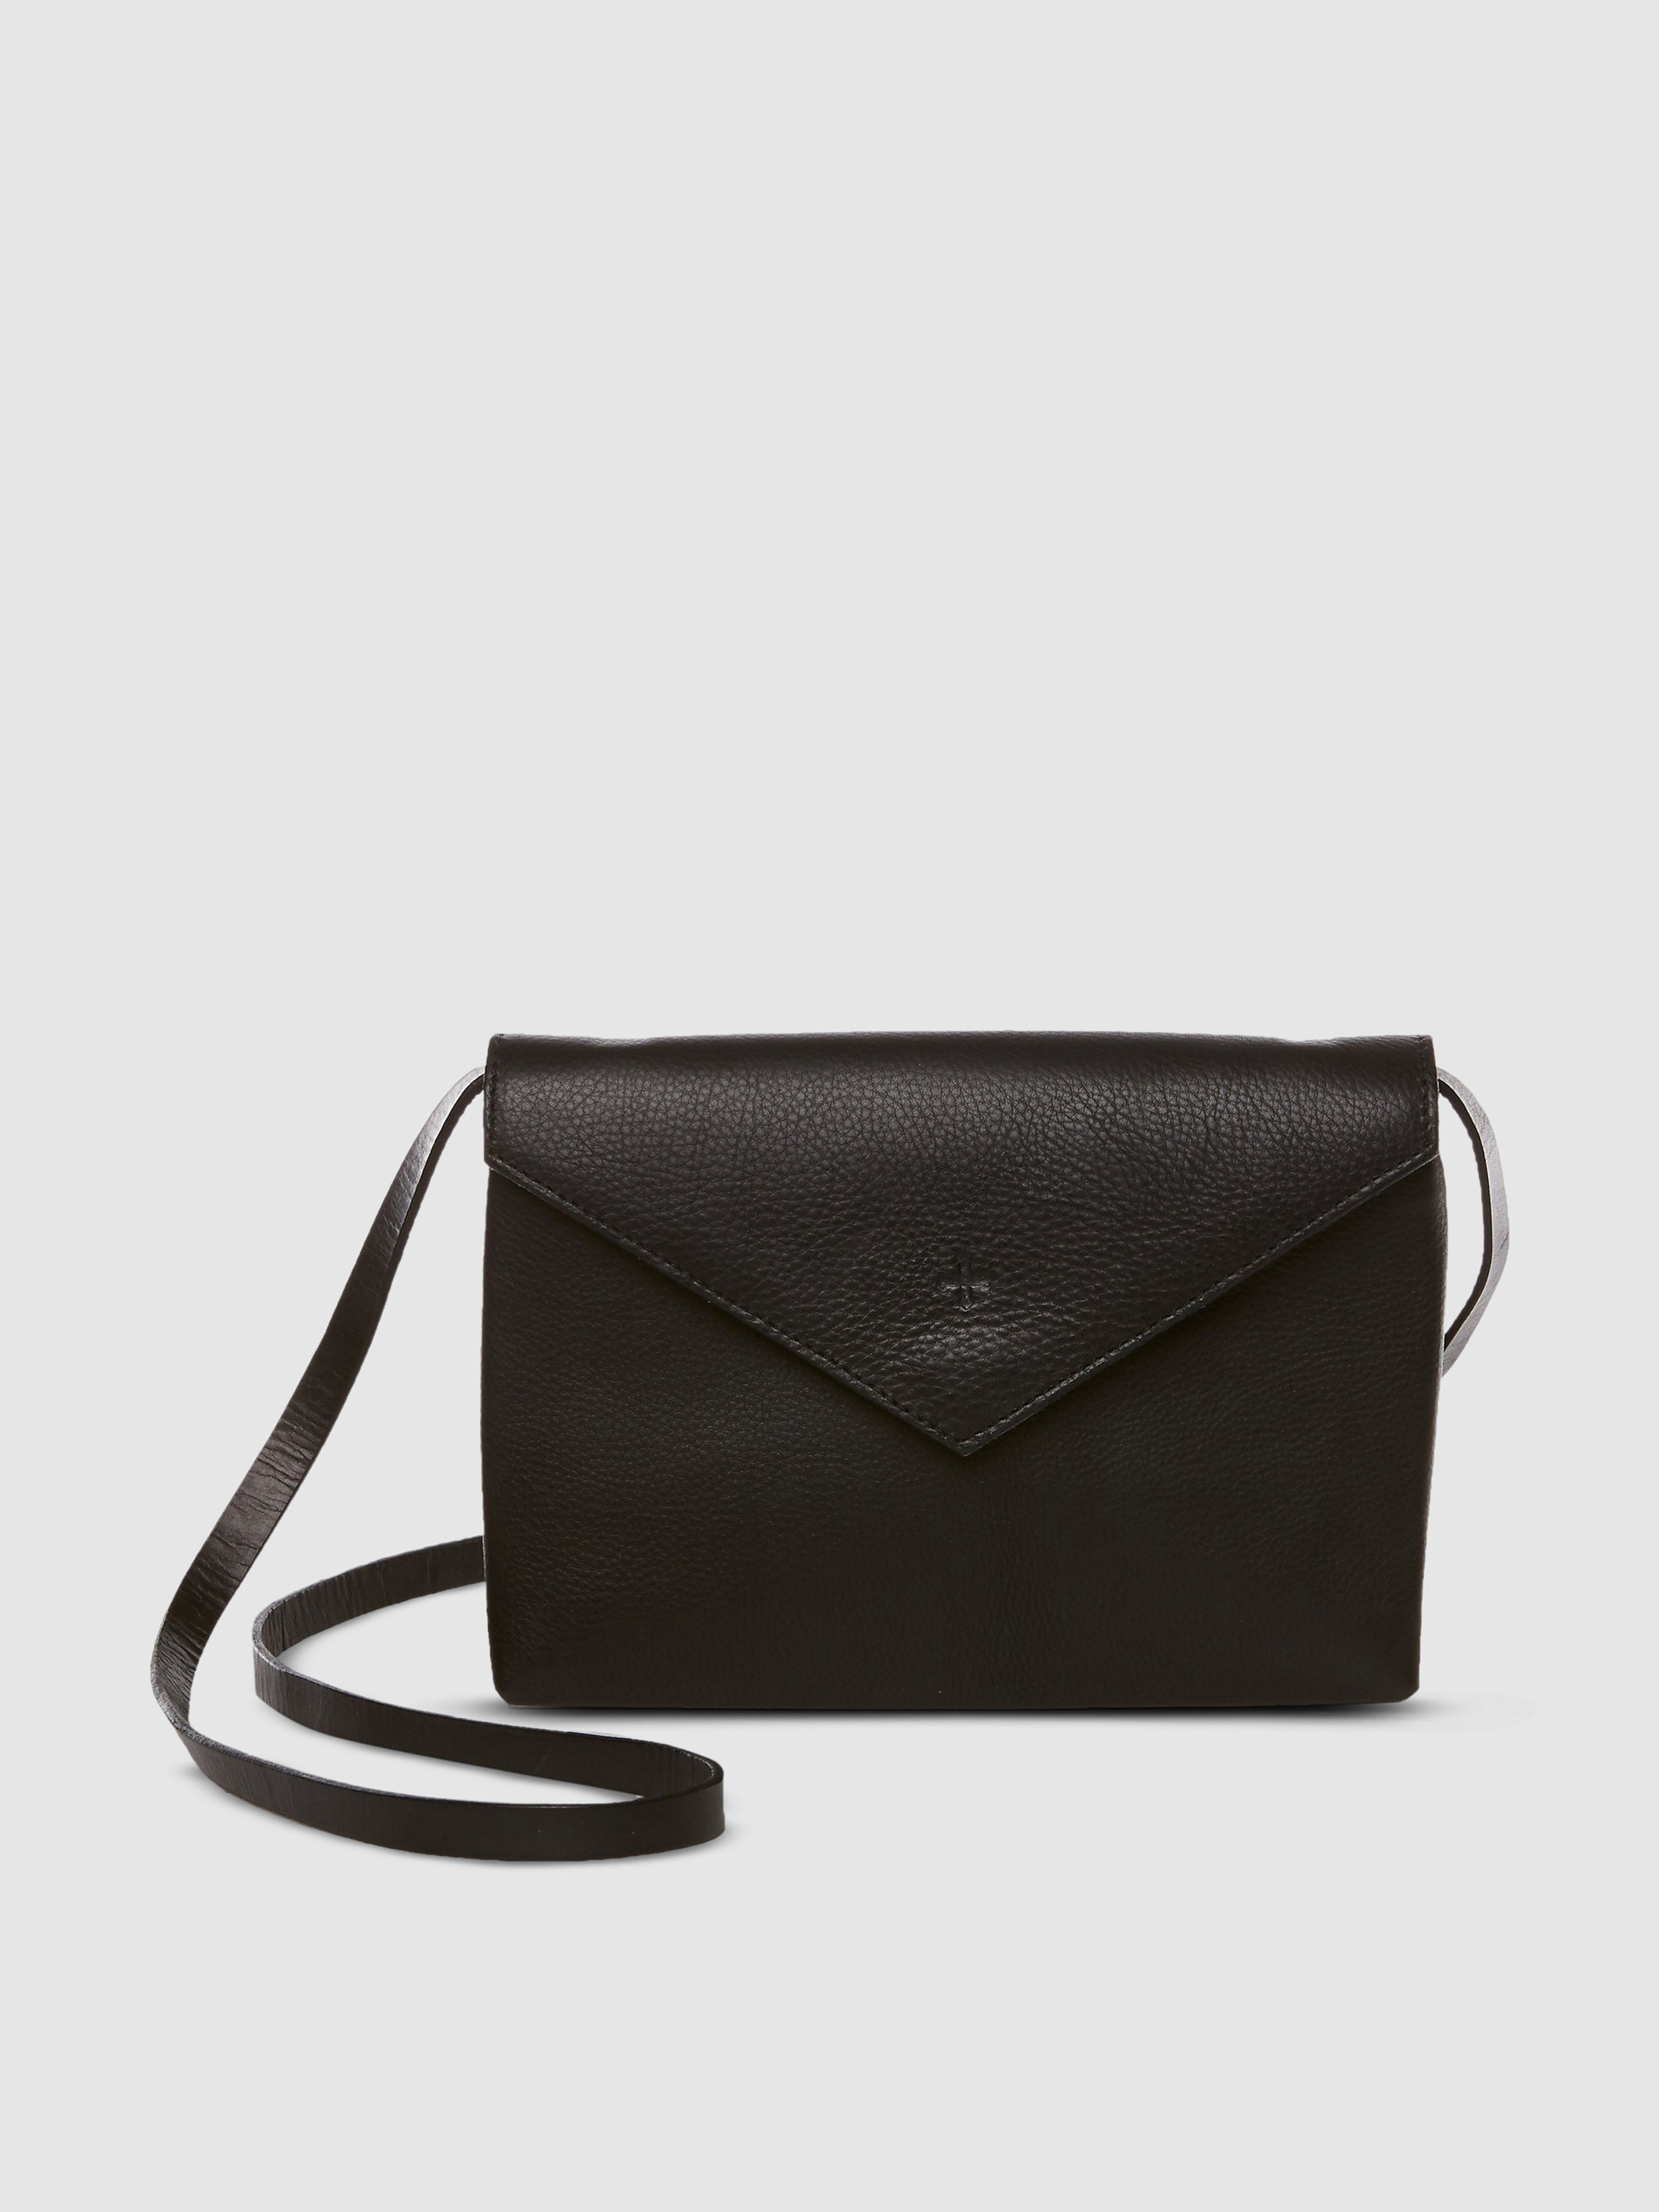 Marie Turnor The Double Envelope In Black